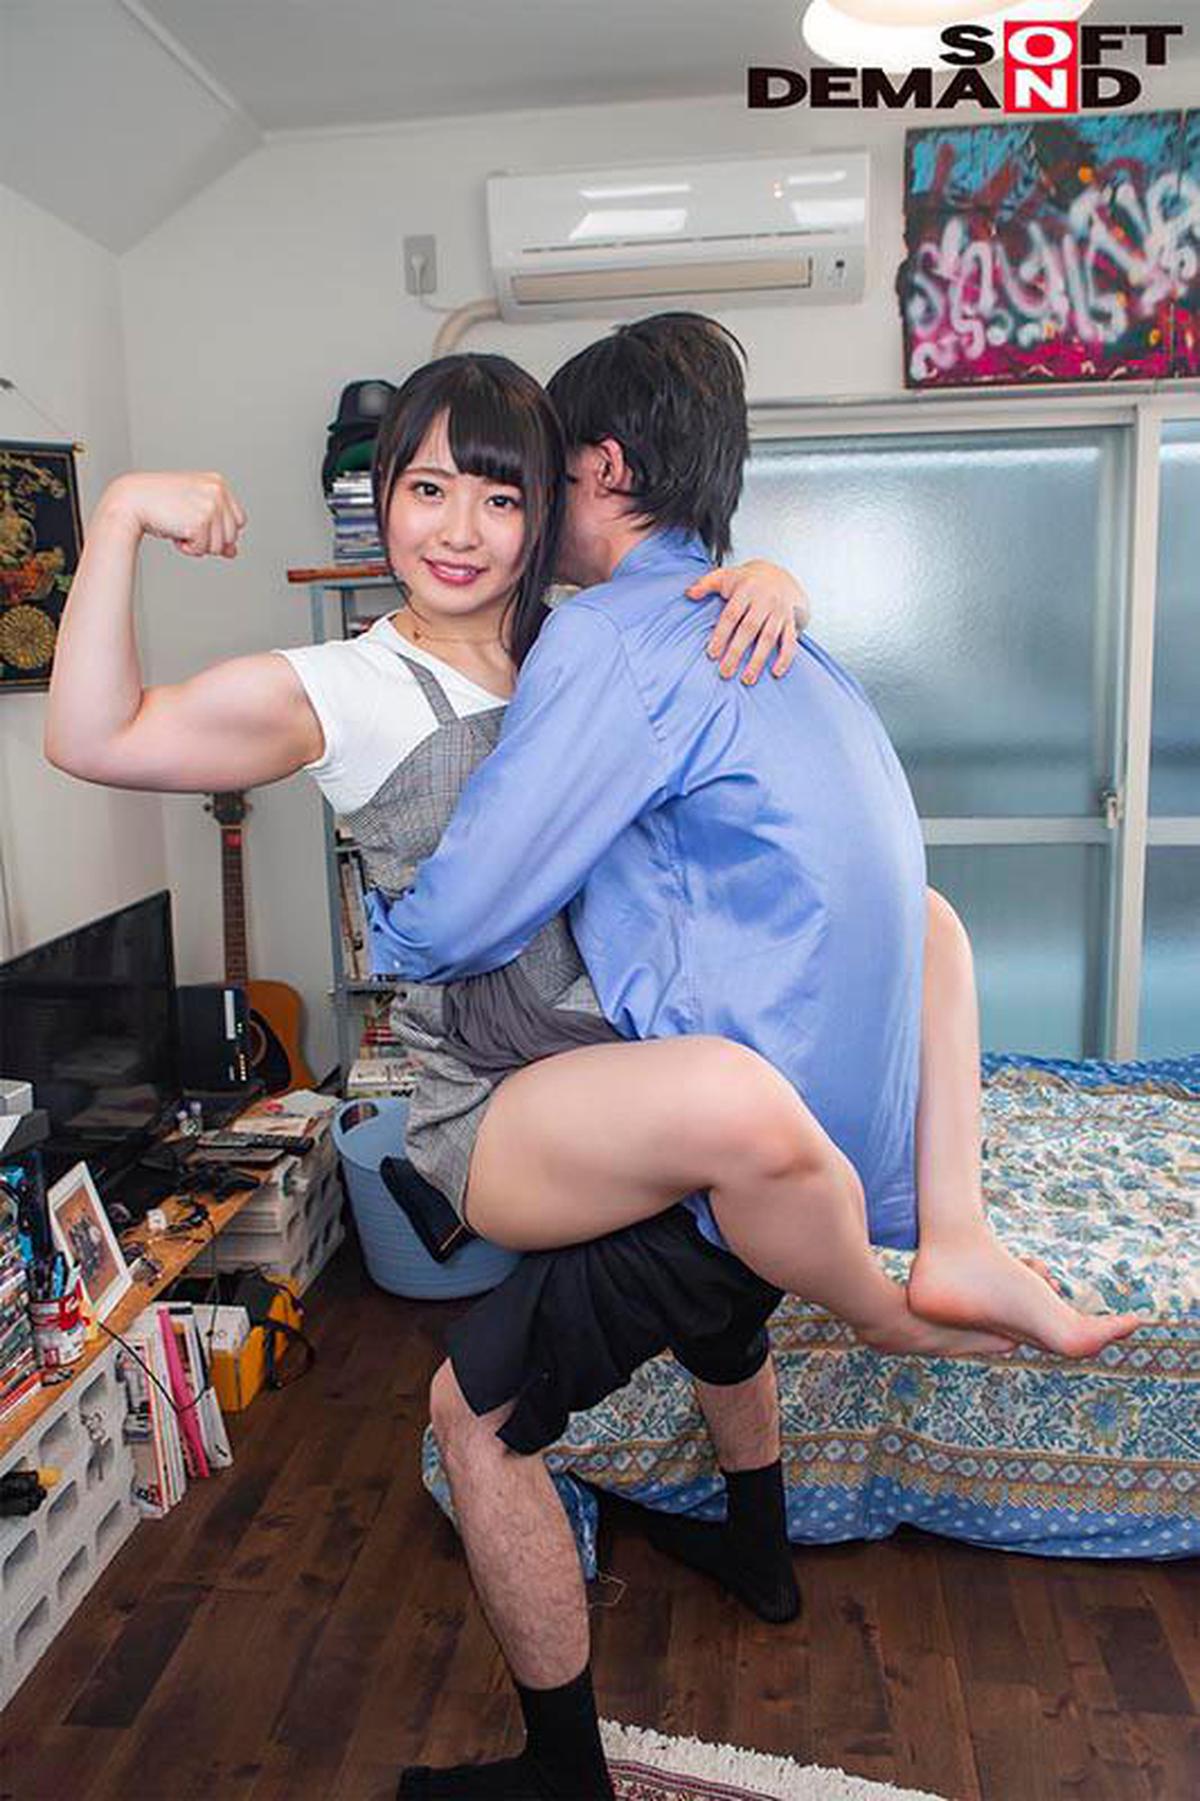 KUSE-005 "Premature Ejaculation Can Be Healed By Muscle Training!" Gachinko SEX 4 Production Without Script * Cum Swallowing On Parade of Muscle Techniques Against Amateurs # Chanyota Slut